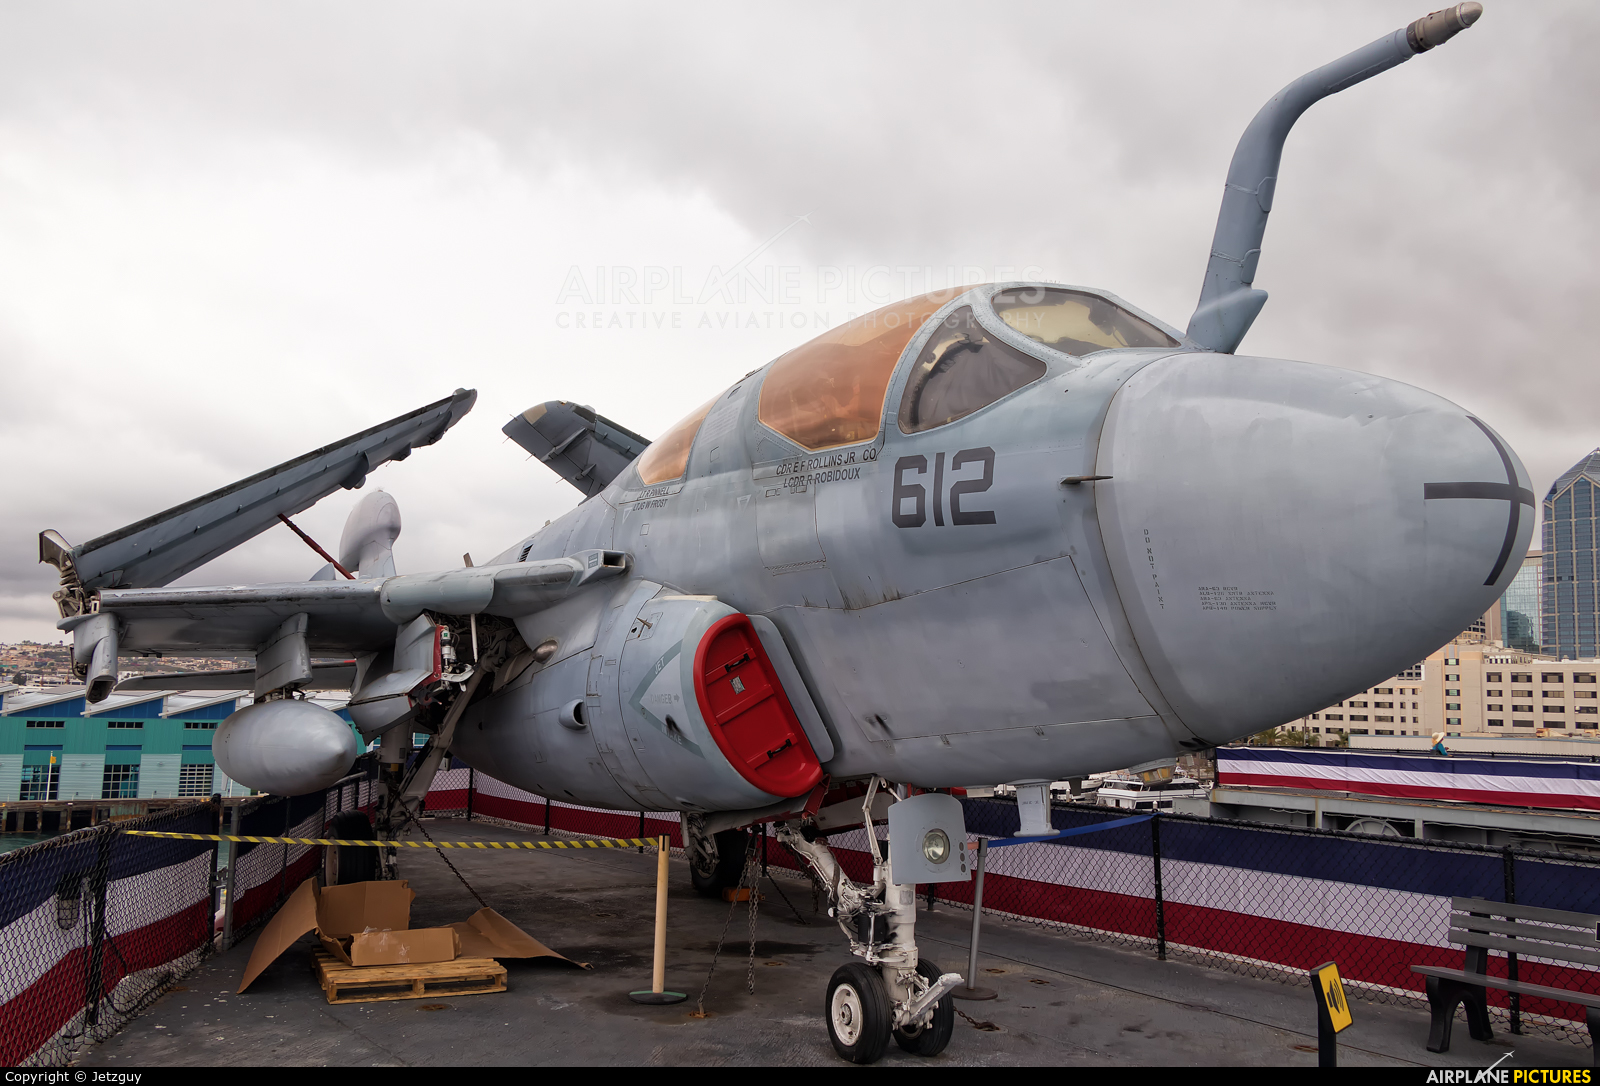 USA - Navy 162935 aircraft at San Diego - USS Midway Museum